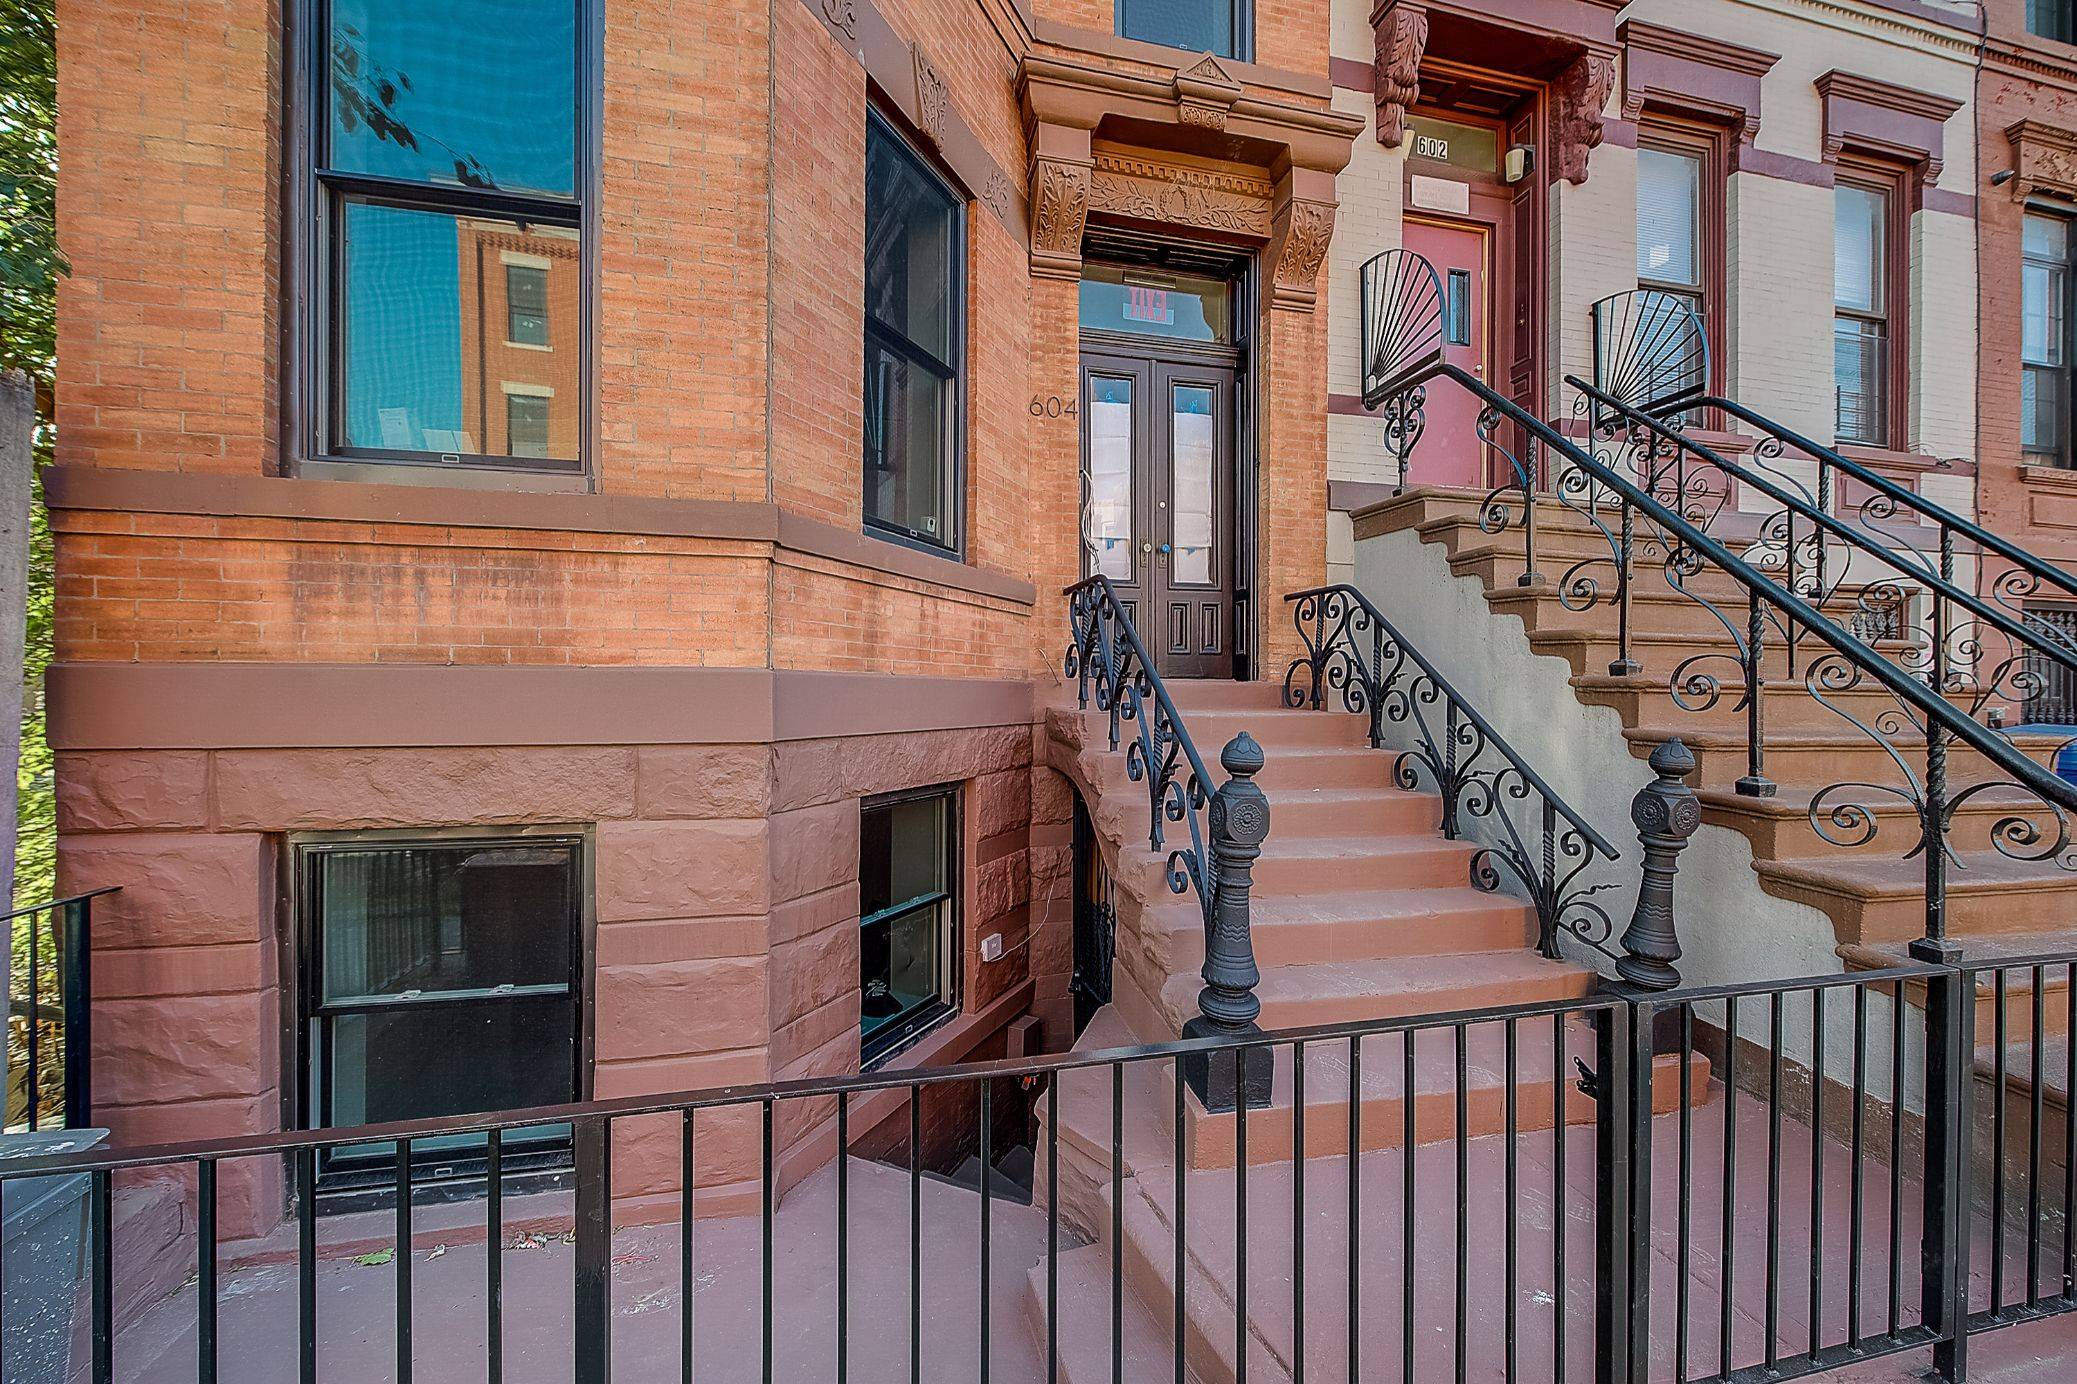 This 2 bedroom condo with one and half bath in handsome red brick townhouse has a spacious open layout kitchen with a living room dining room combo.